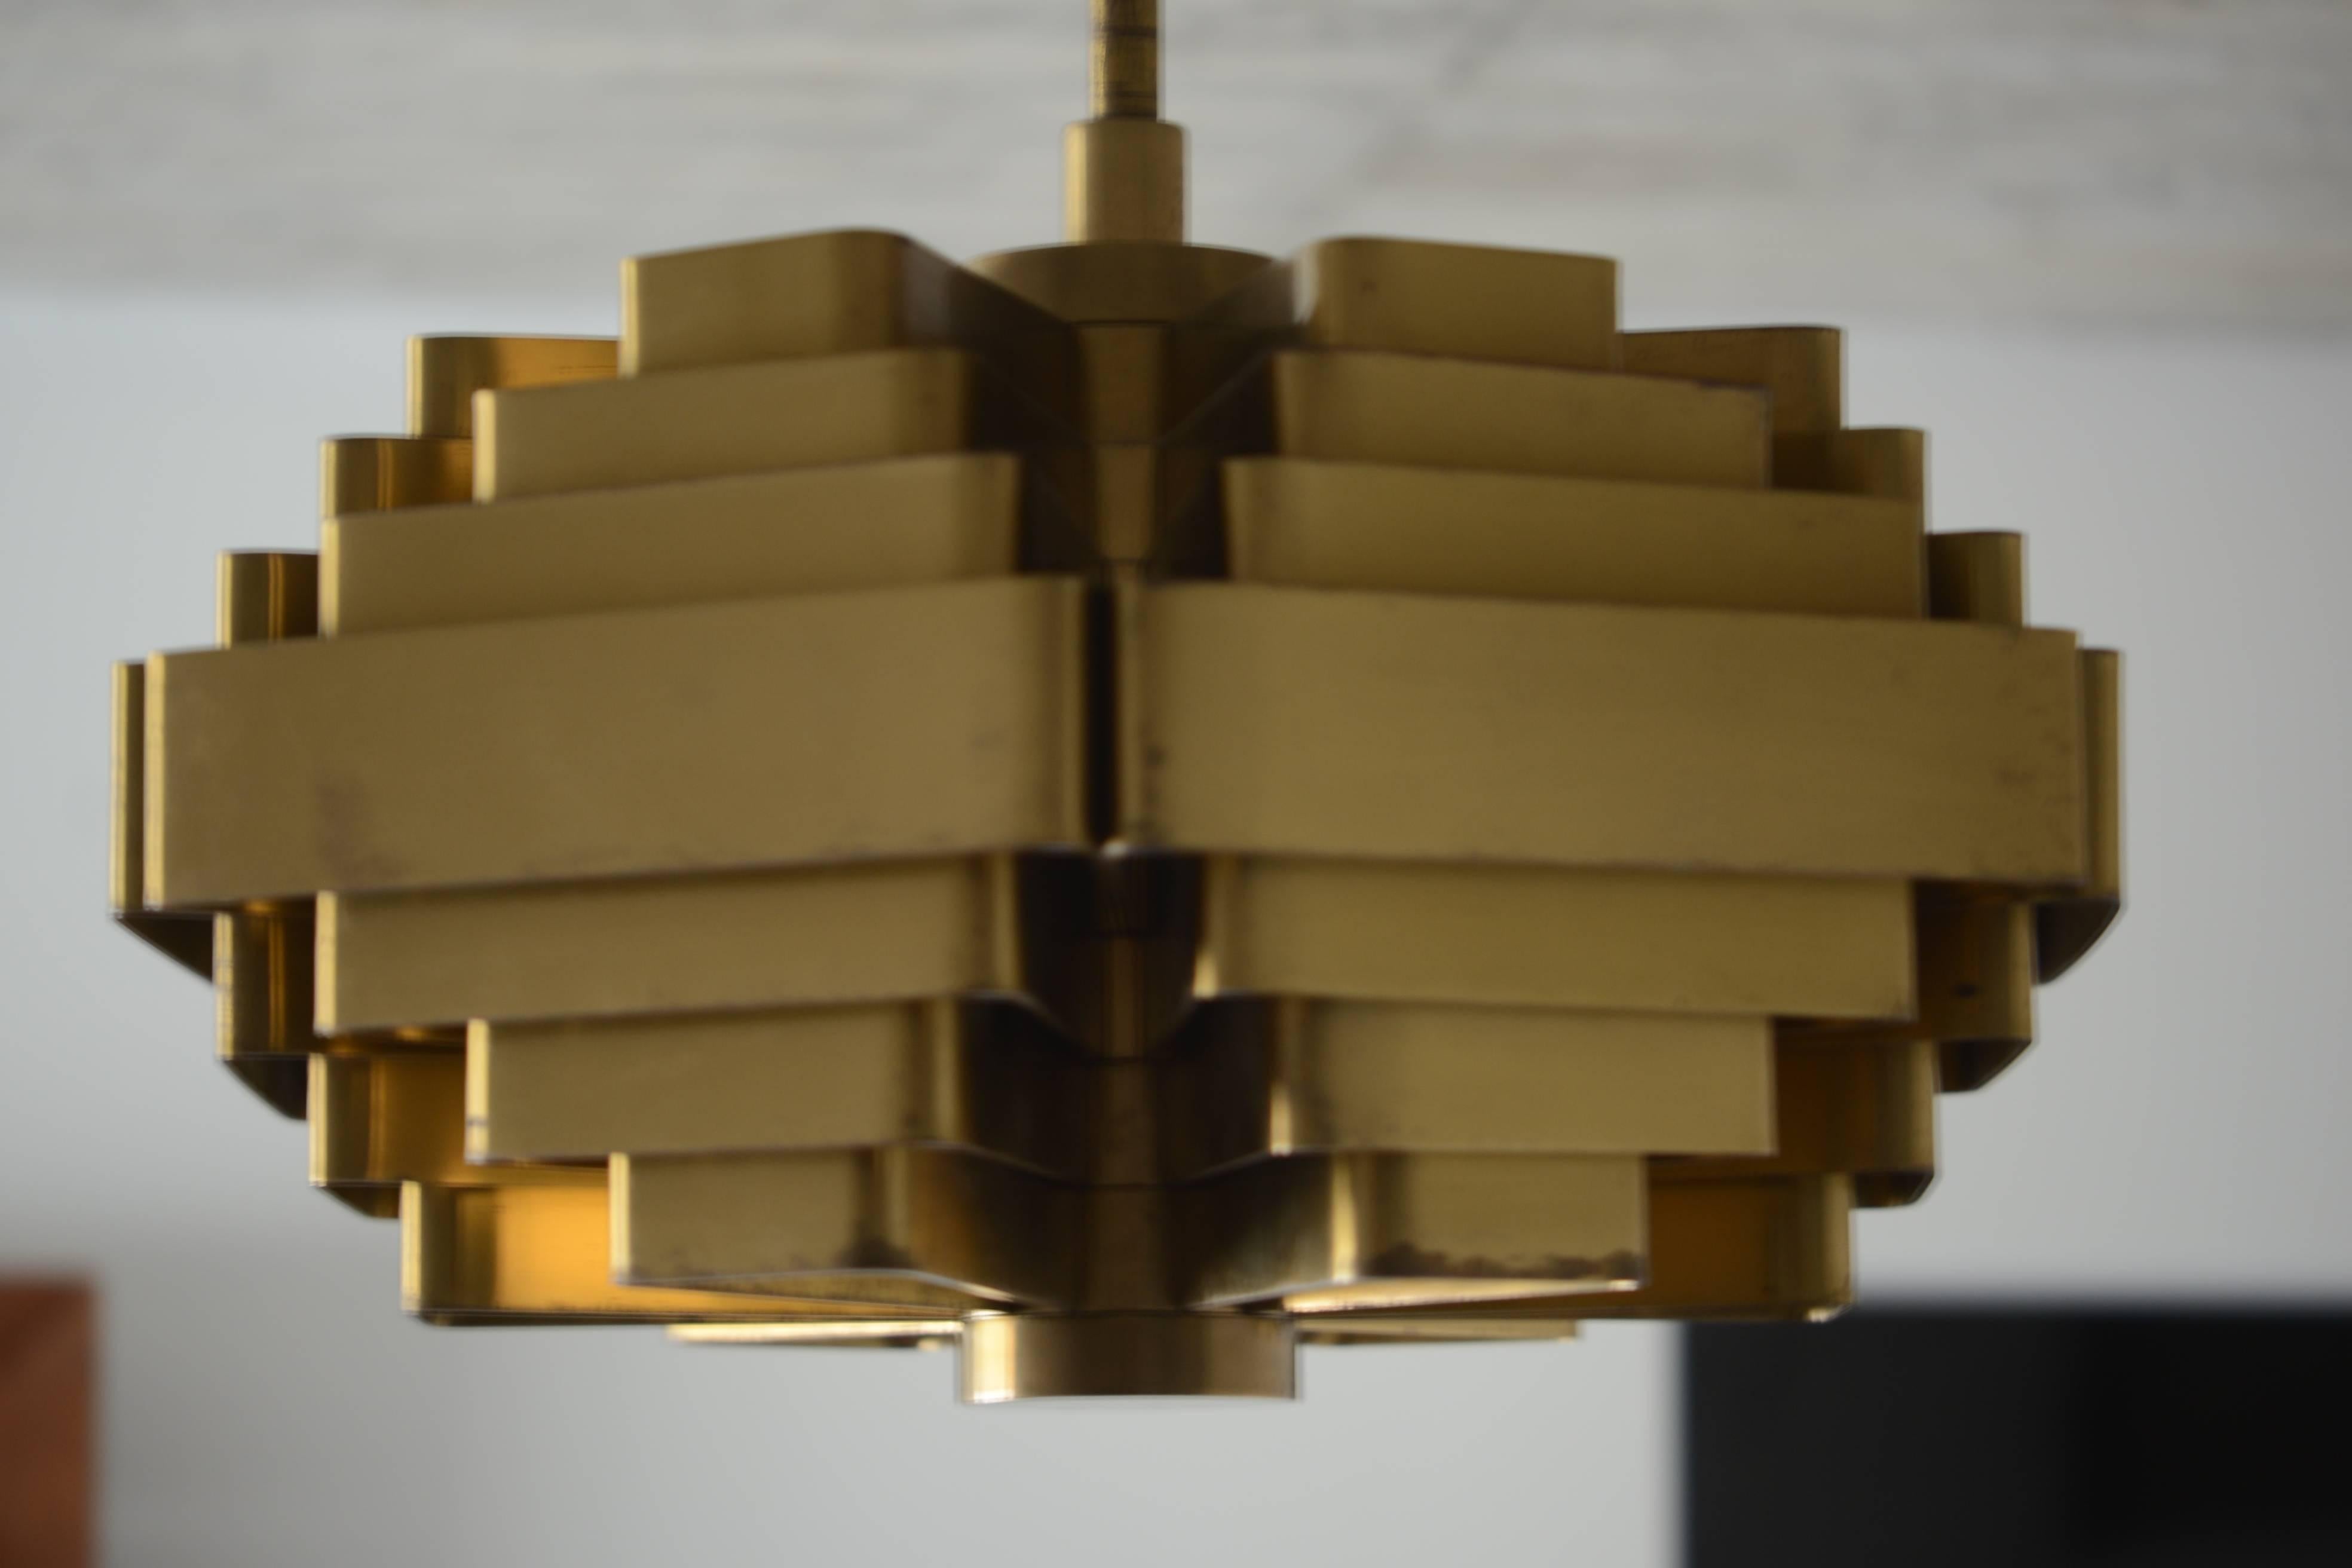 Jules Wabbes, rare large Osaka lamp made for the exhibition in 1970 in Osaka. This is the small model made of brass. There are six bulbs to create a warm light. We can assist with handling and shipping anywhere in the world. Feel free to request a